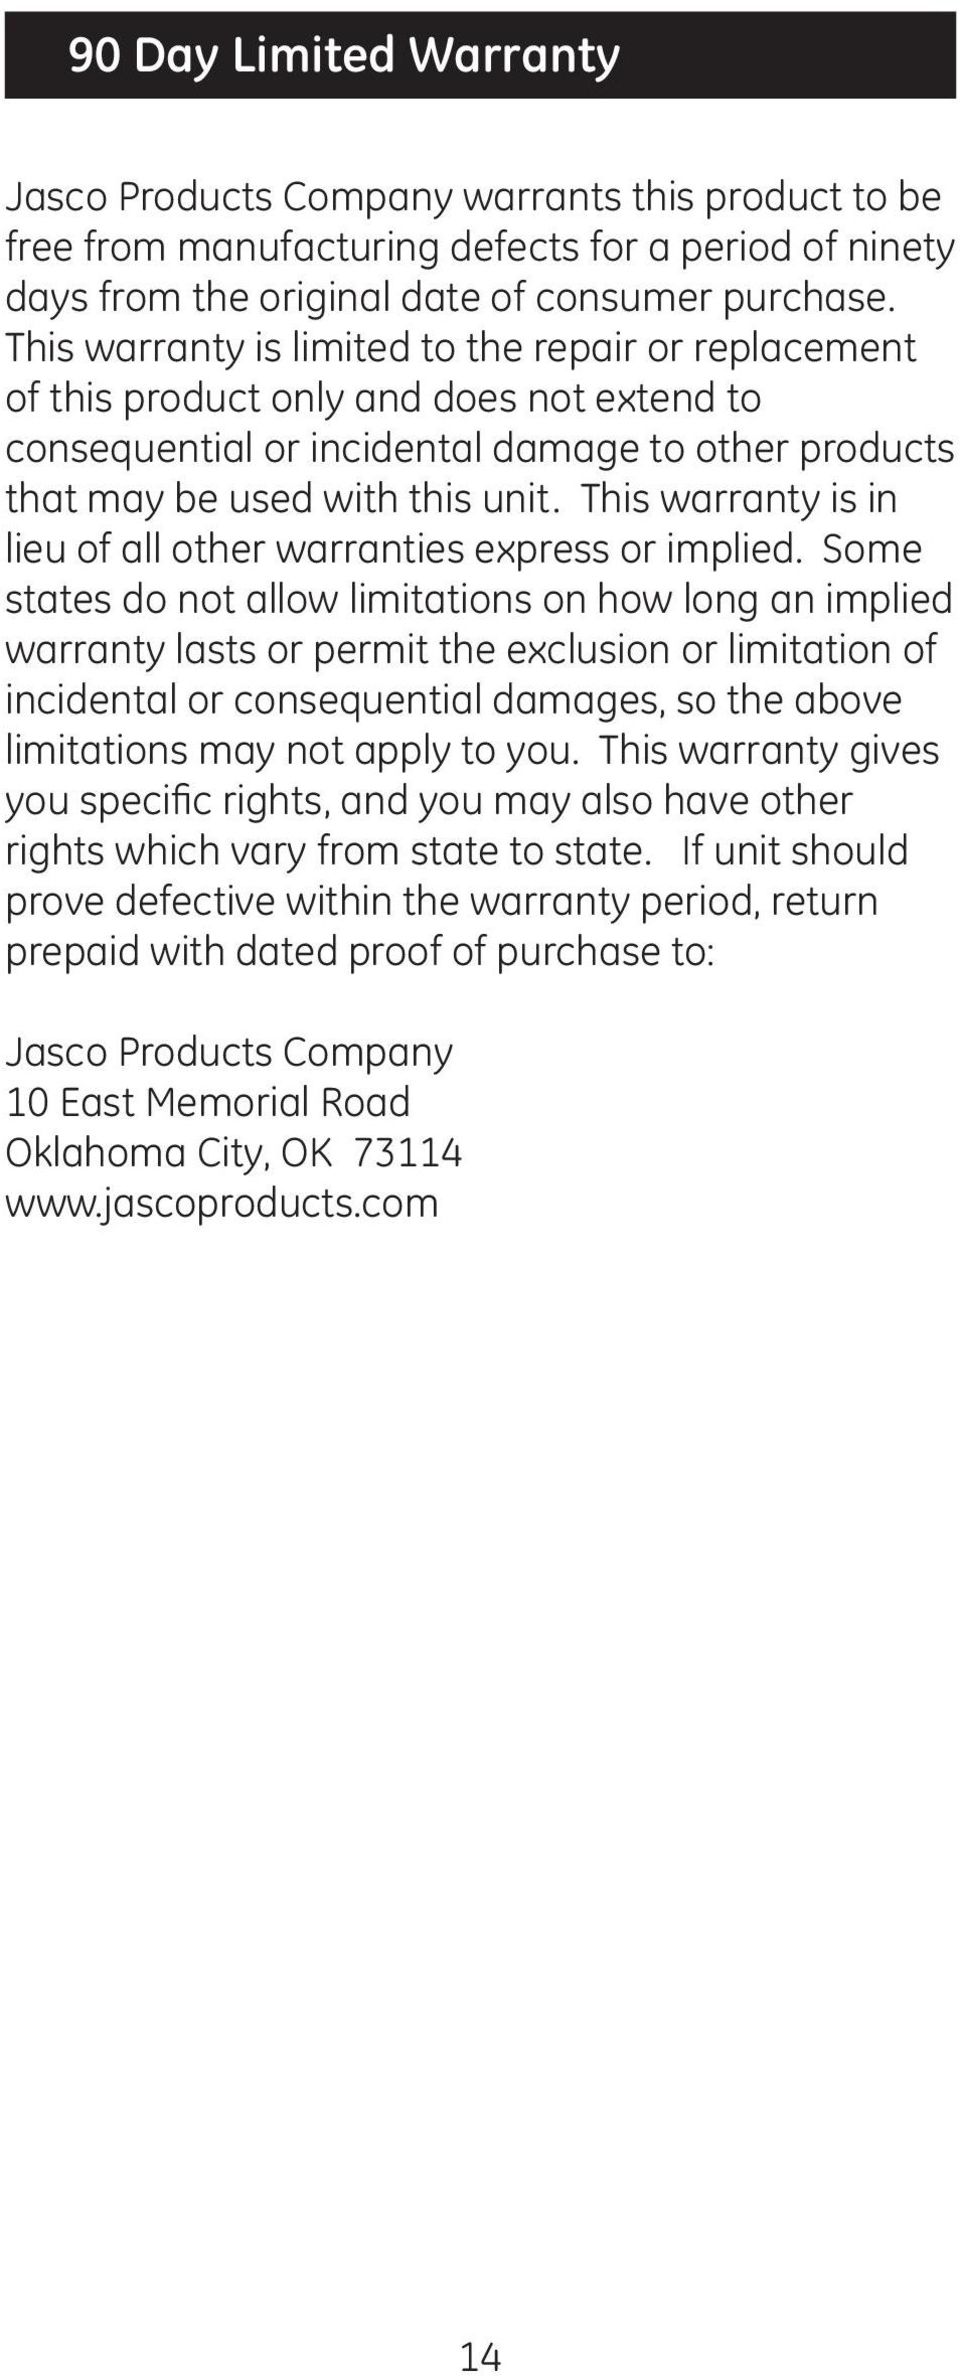 This warranty is in lieu of all other warranties express or implied.